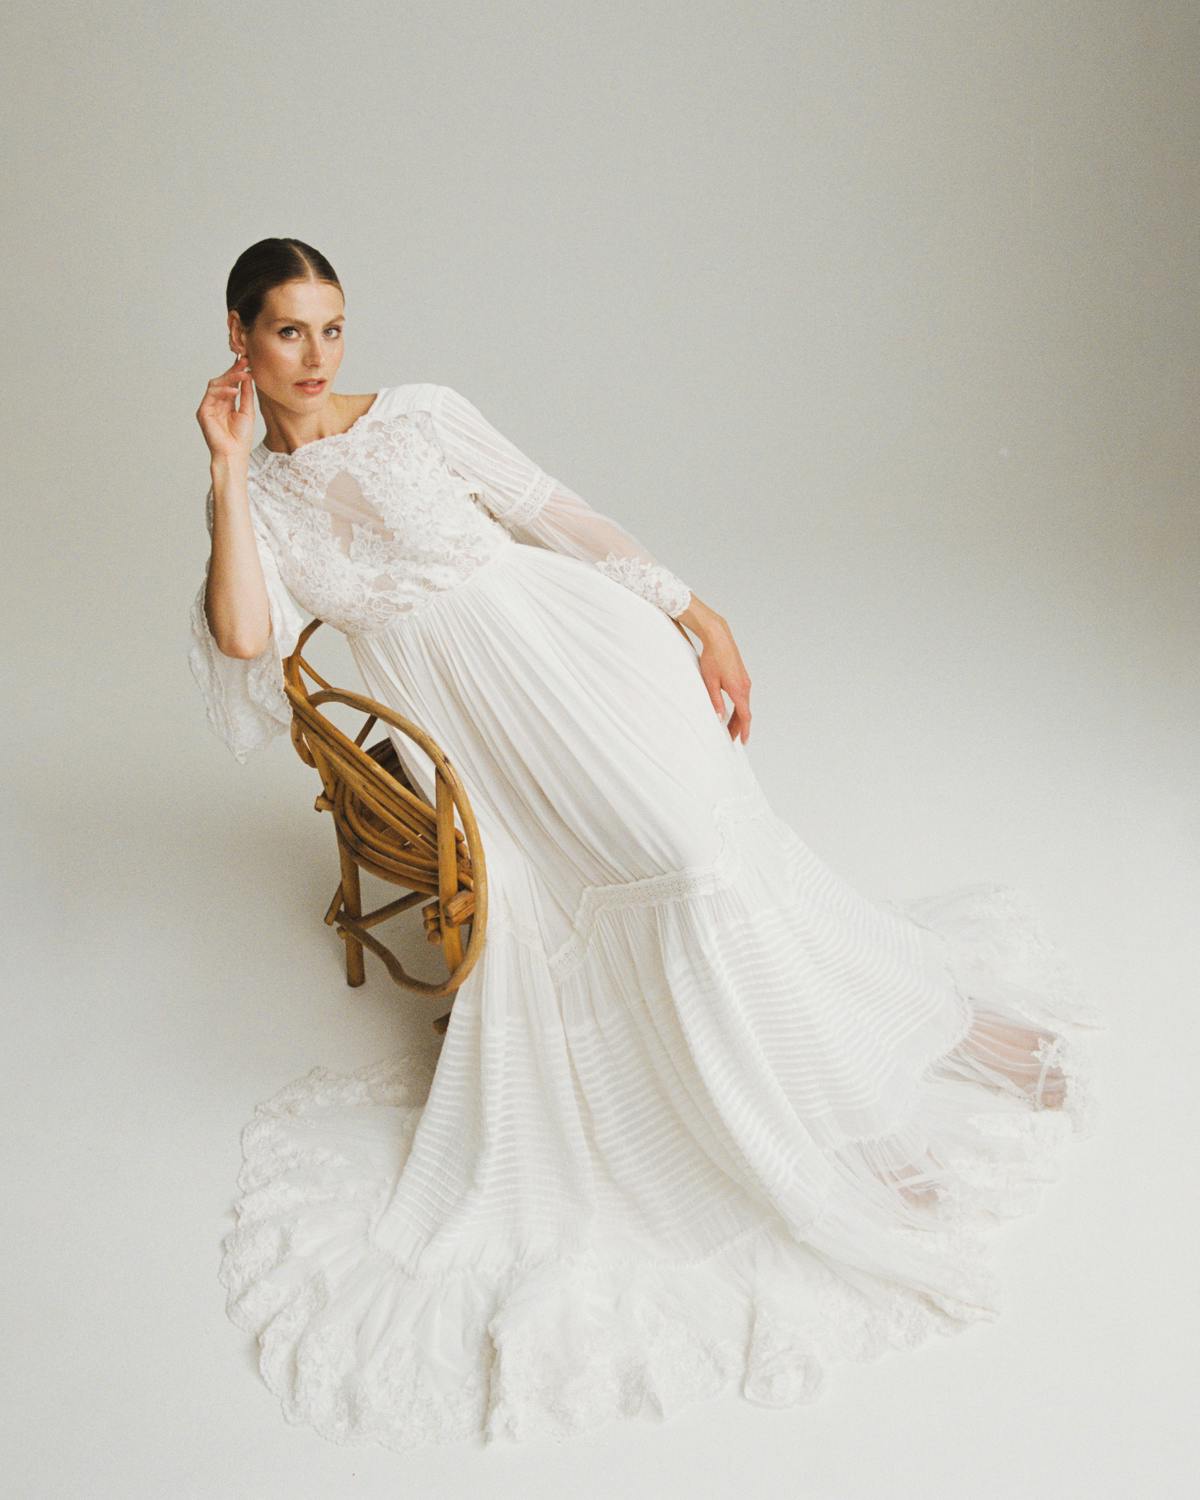 The Bridal Gown, Vintage White. Image #4